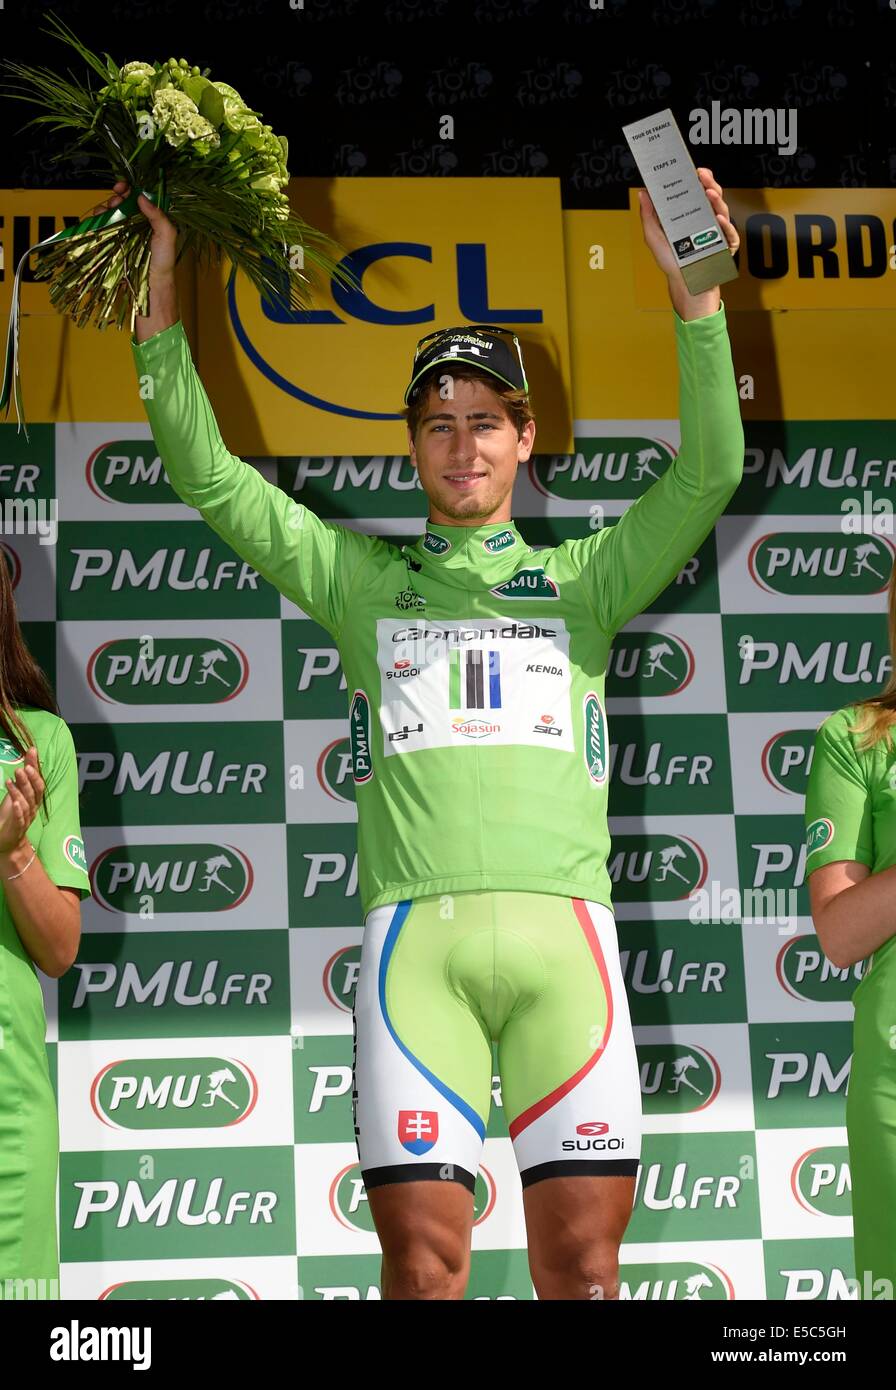 26.07.2014. Bergerac to Perigueux, France. Tour de France Cyclcing championships, Stage 20 (penultimate stage) cycling race.  SAGAN Peter SVK of Cannondale   podium green jersey holder Stock Photo